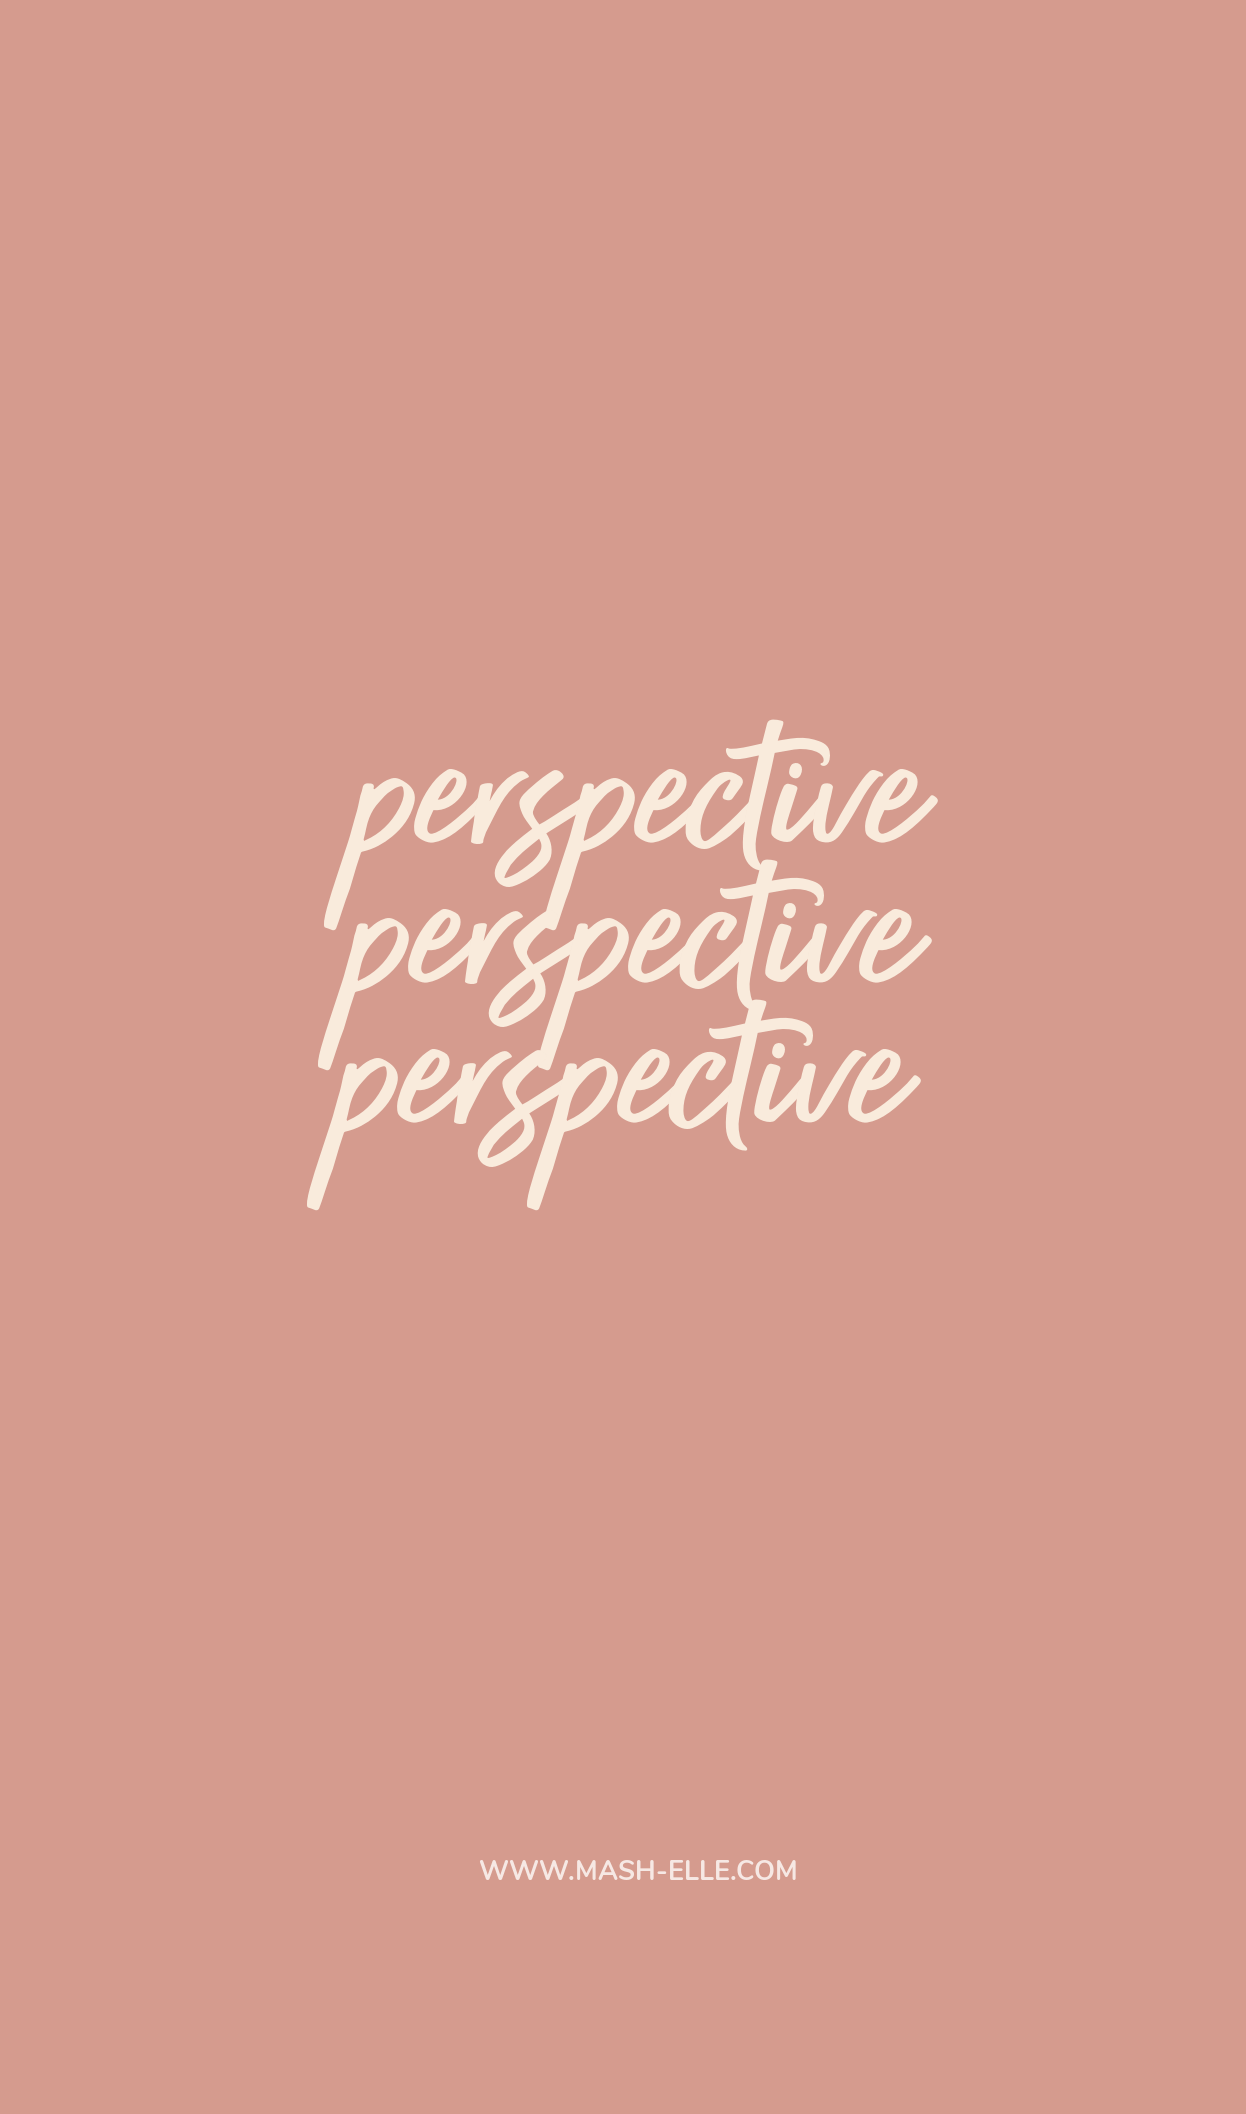 A quote about perspective on pink background - Love, positivity